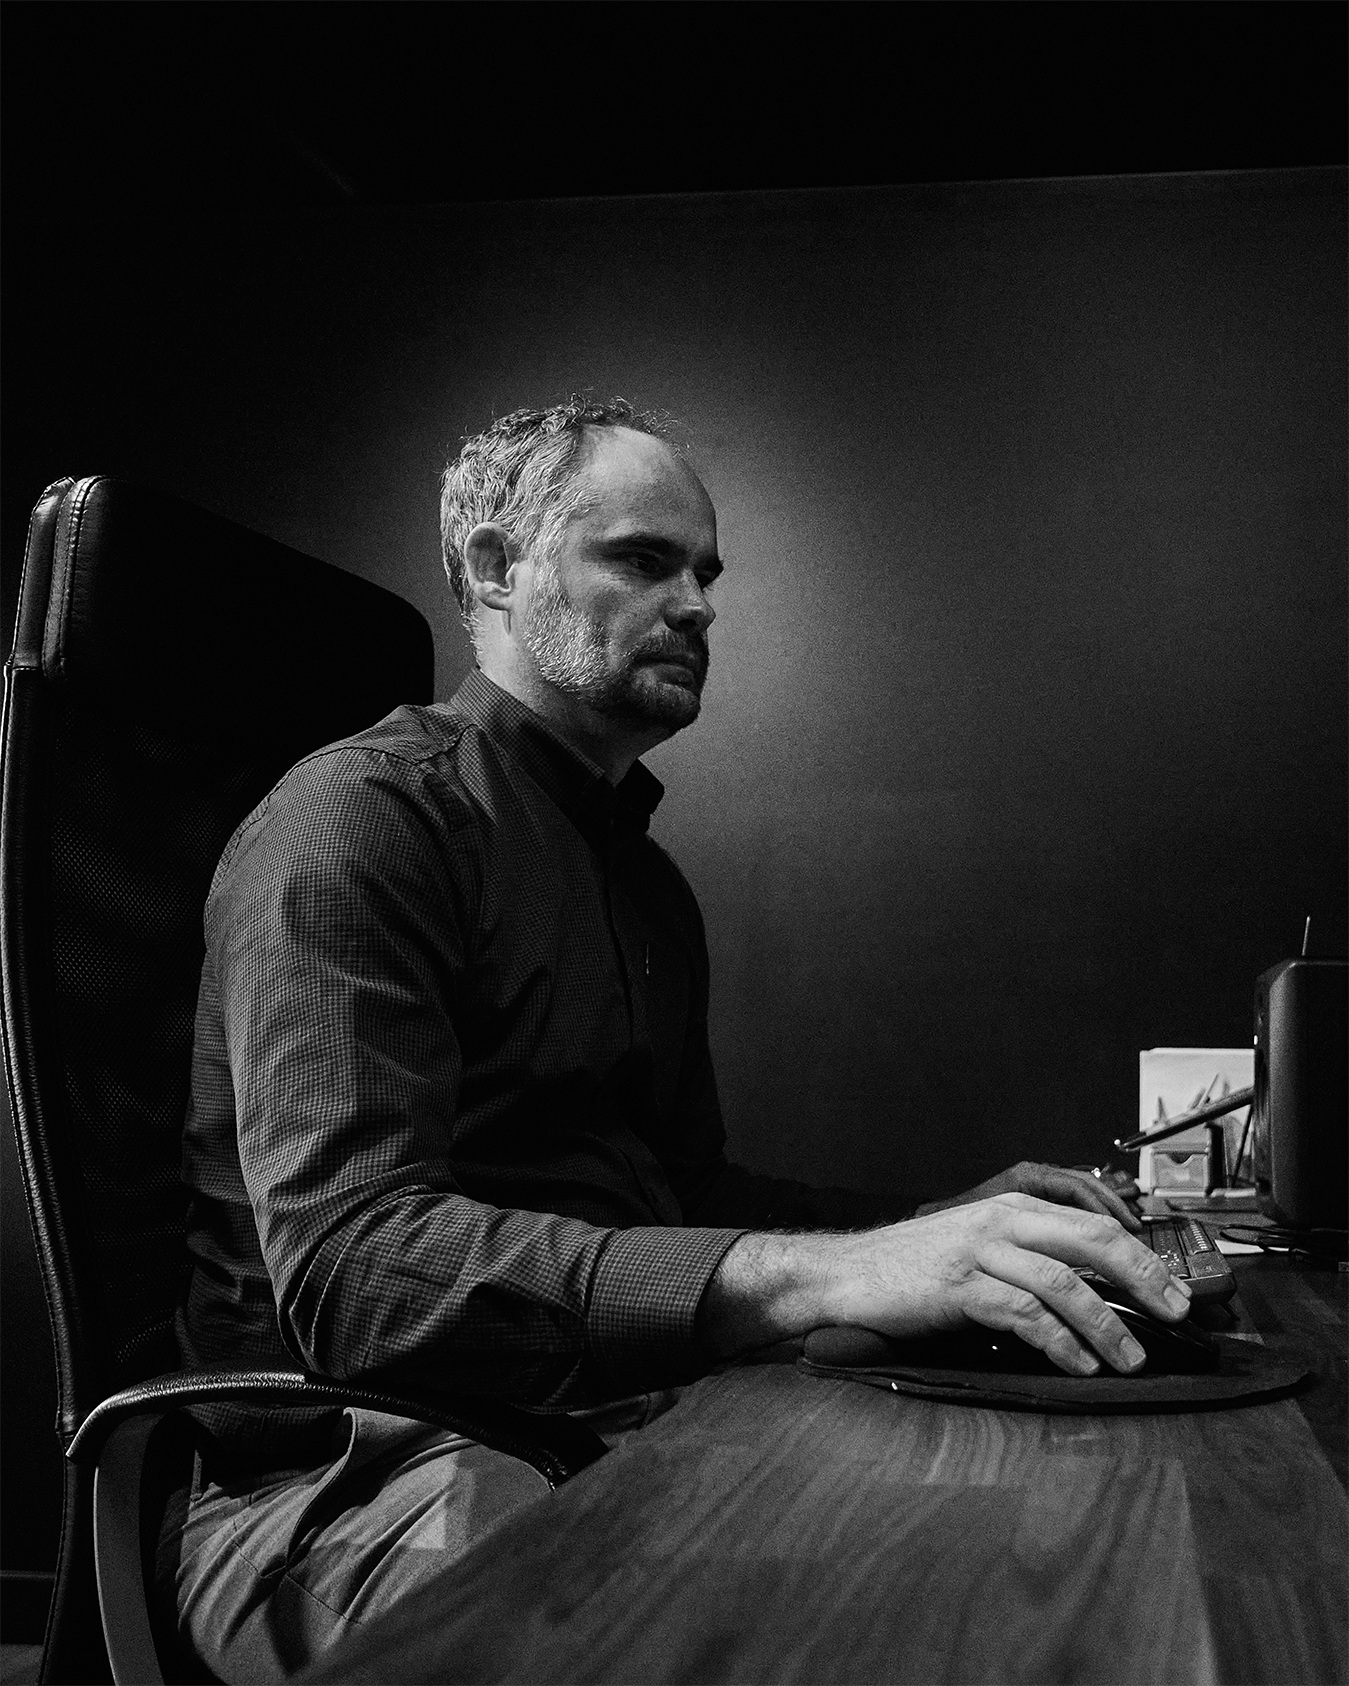 A black and white image of a coelement team member working at a computer.